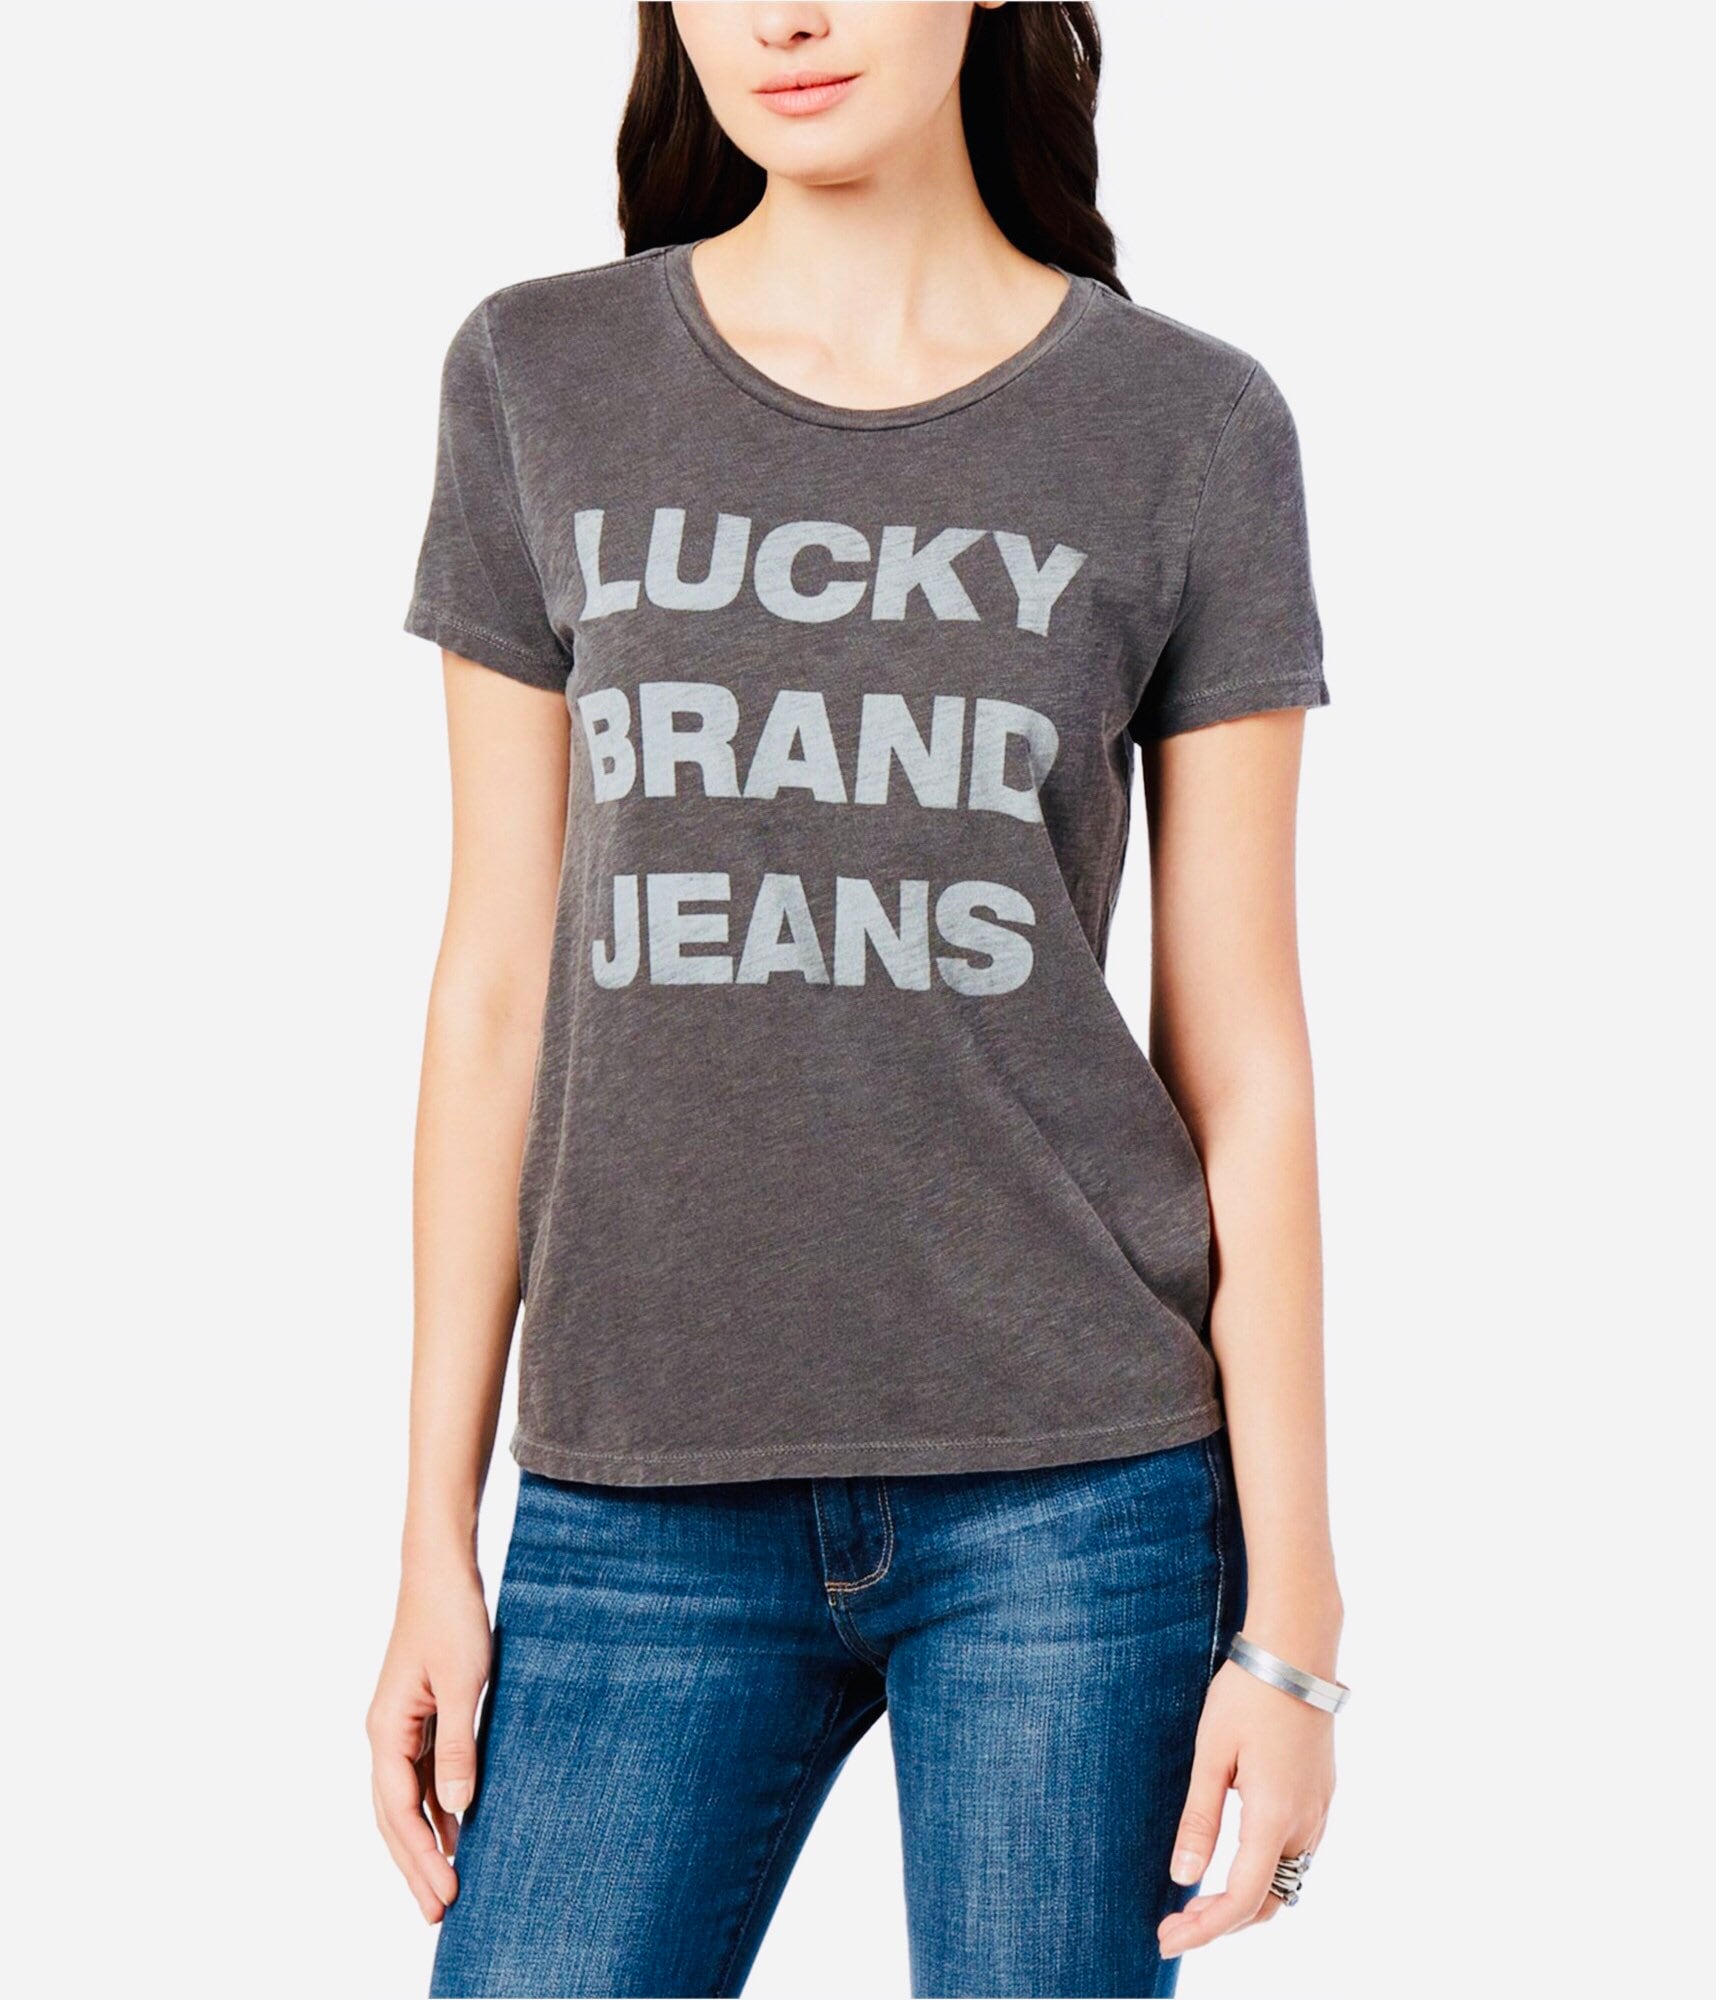 Lucky Jeans Vintage Tee Paper Thin Womens Lucky Brand Jeans Graphic T-shirt  Sz Sm -  Canada